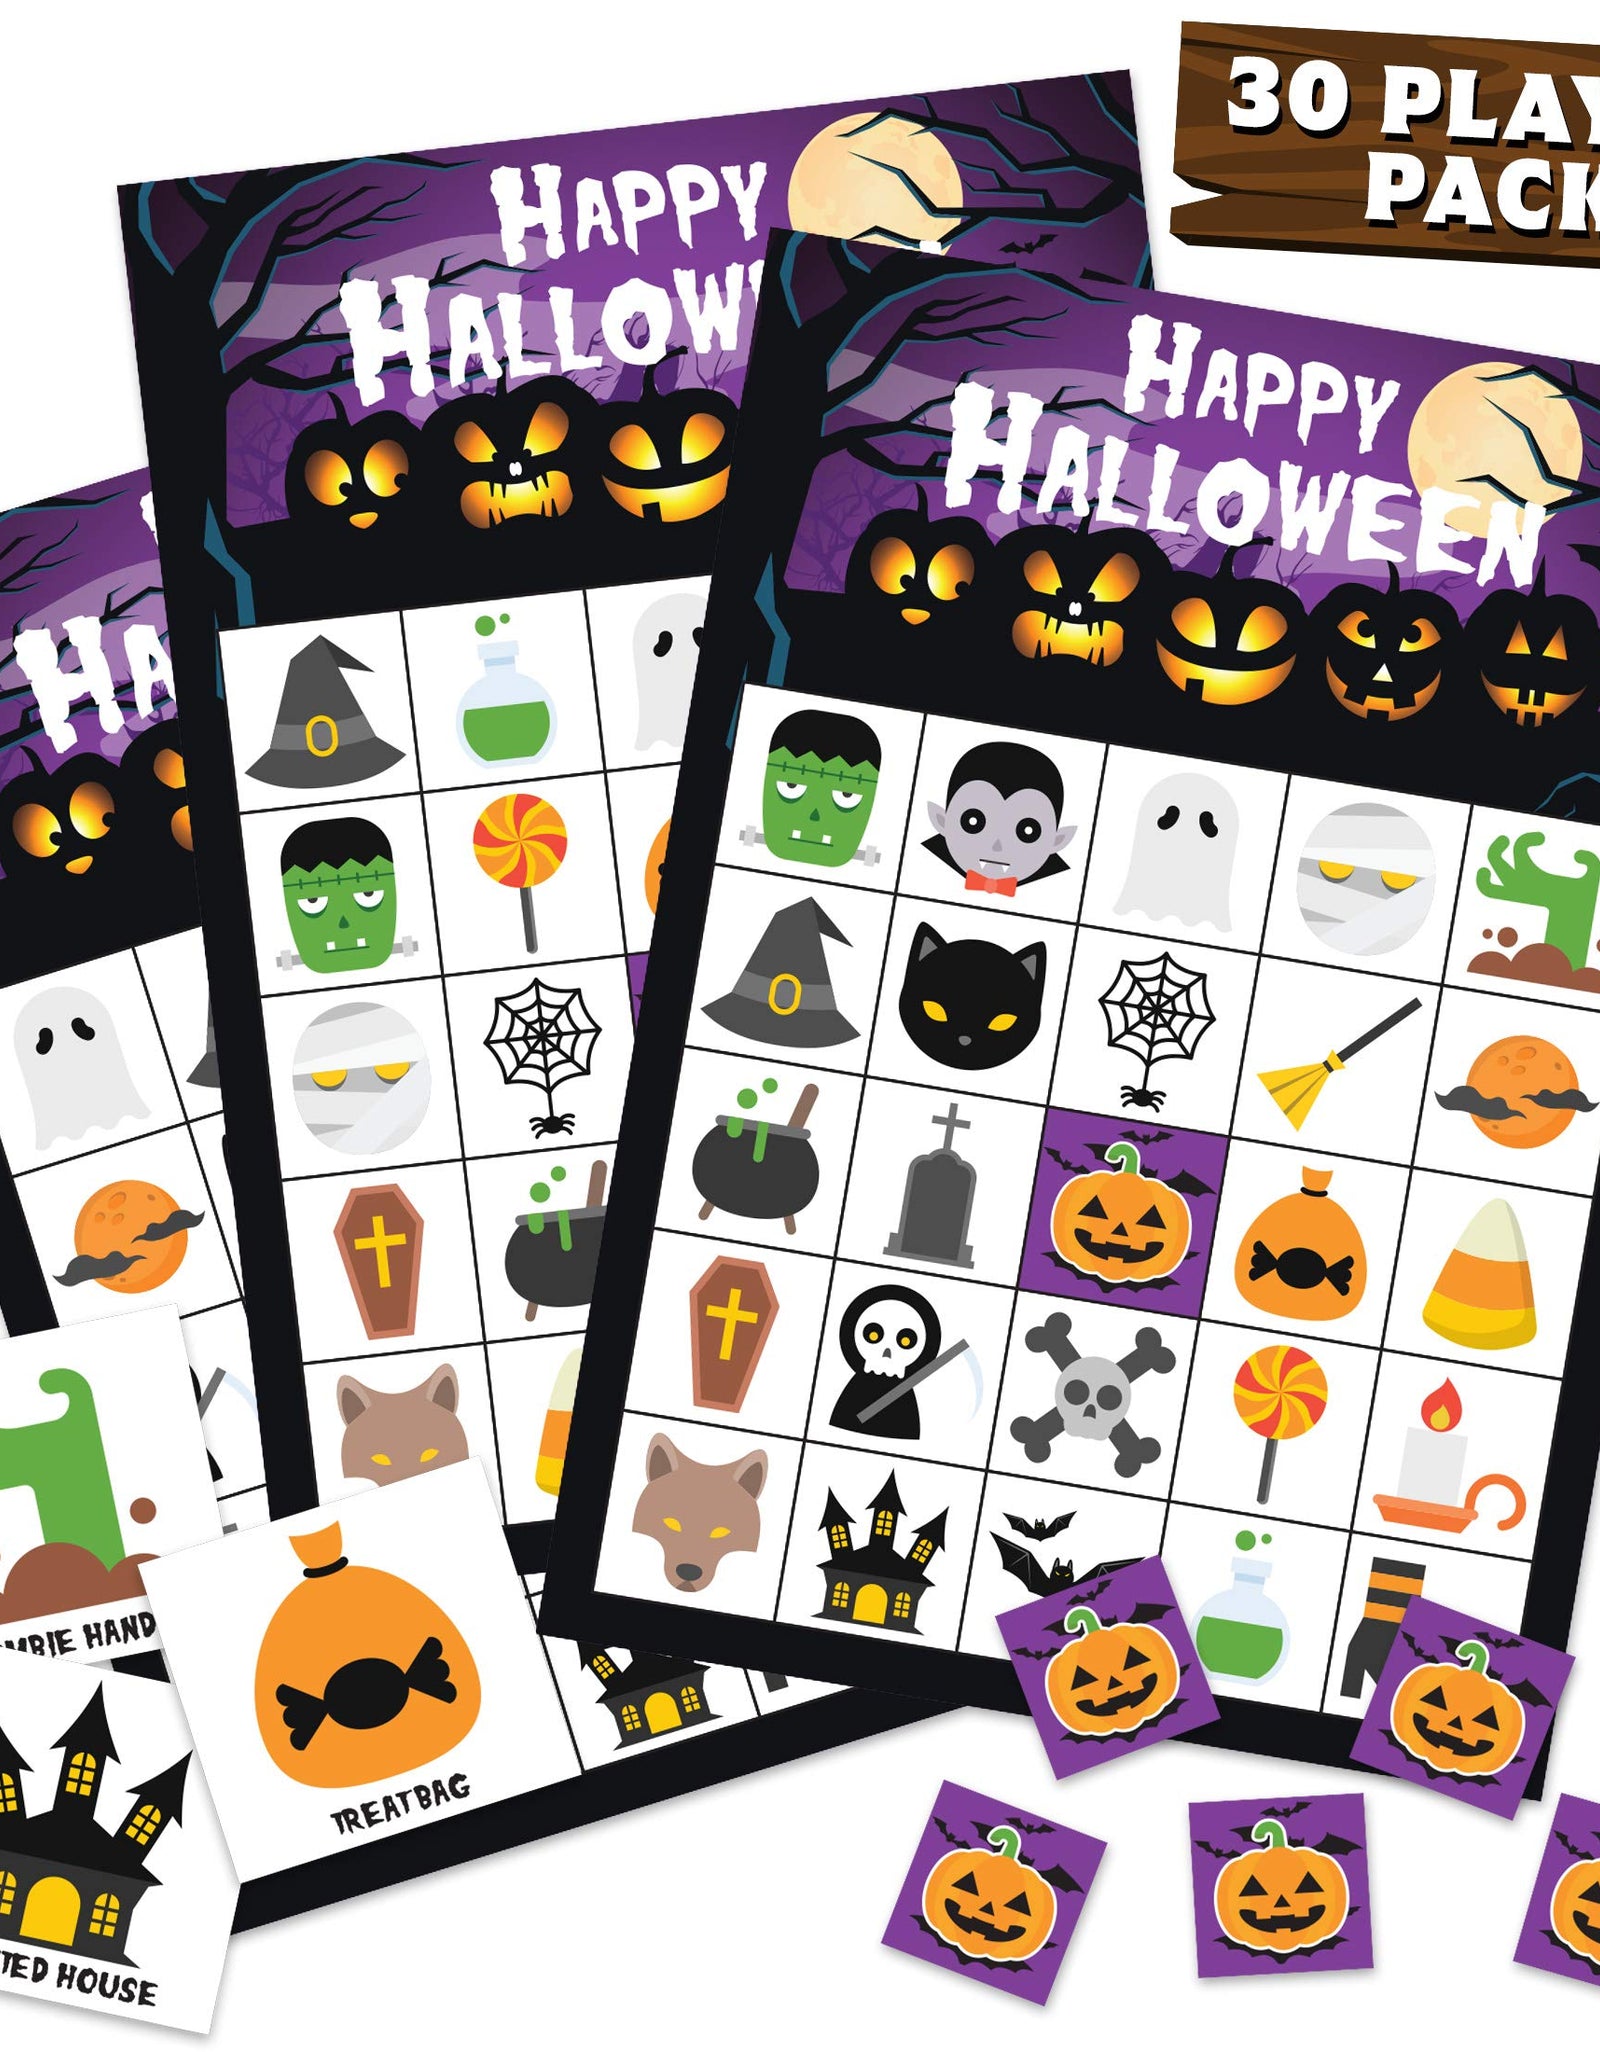 Halloween Bingo Game Set - 30 Player Cards Pack - Halloween Party Games for Kids, Adults & Family Activity - Halloween Crafts for Classroom School Supplies Board Games